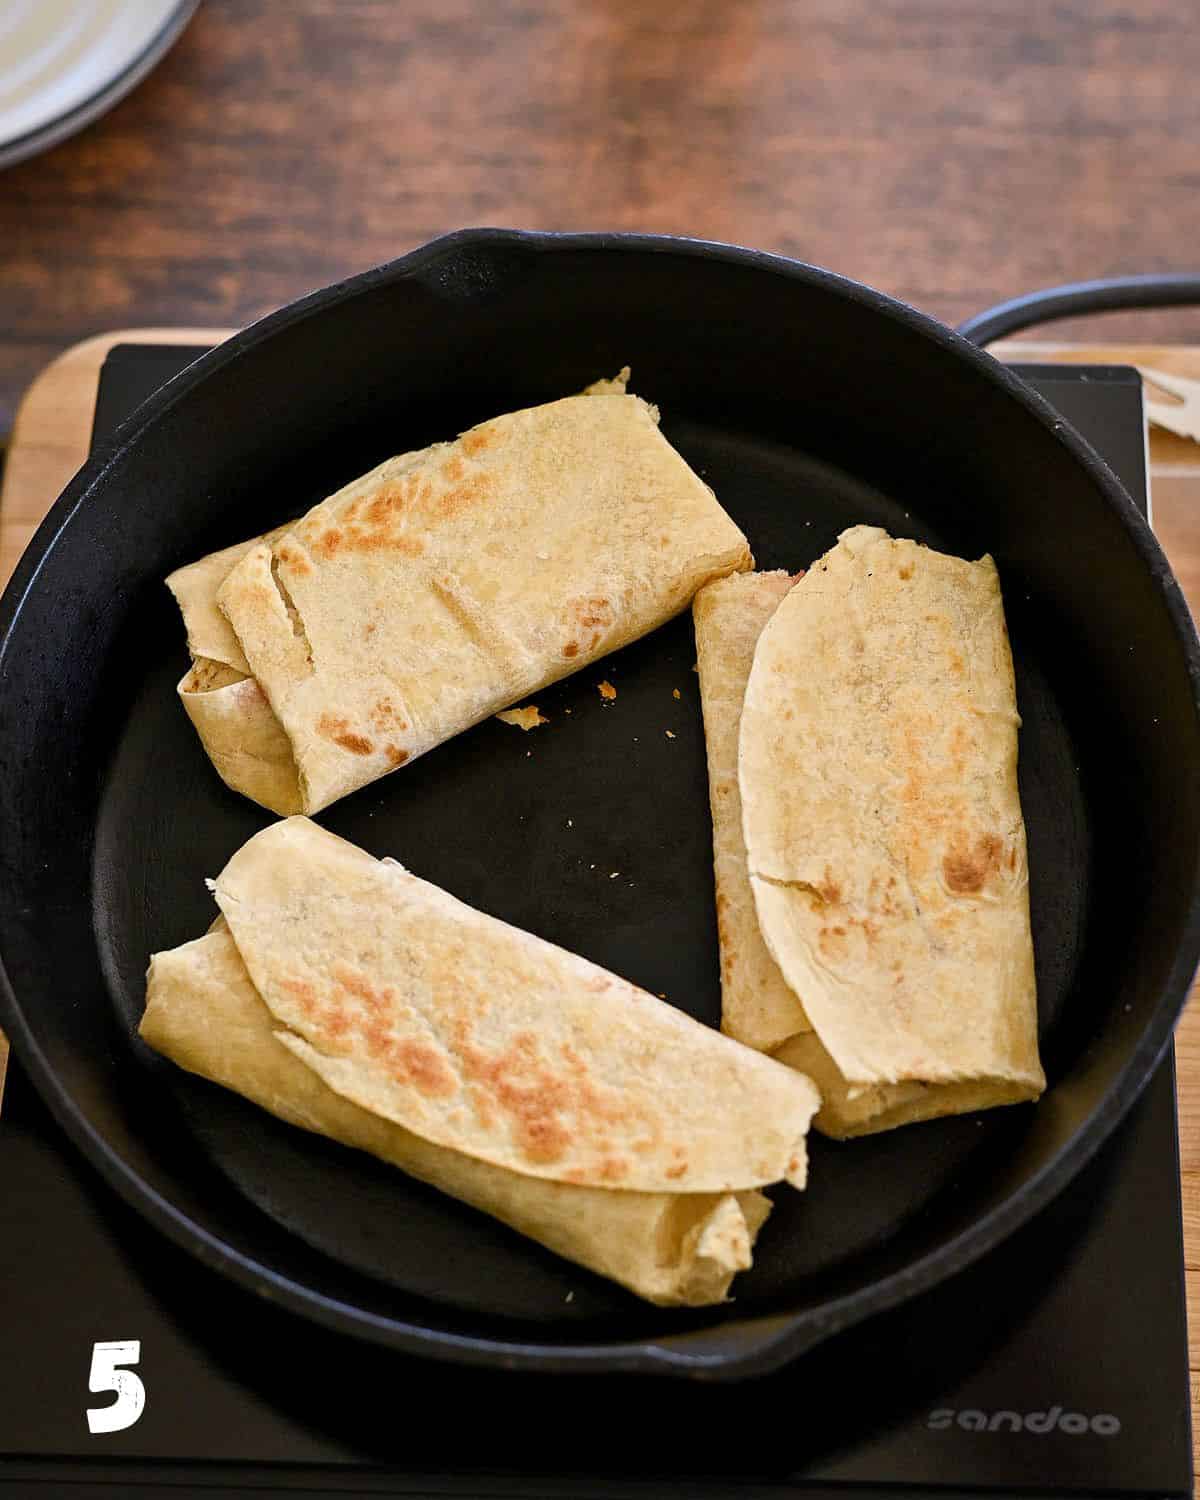 Stuffed tortillas turning golden brown after being cooked in a cast iron skillet. 